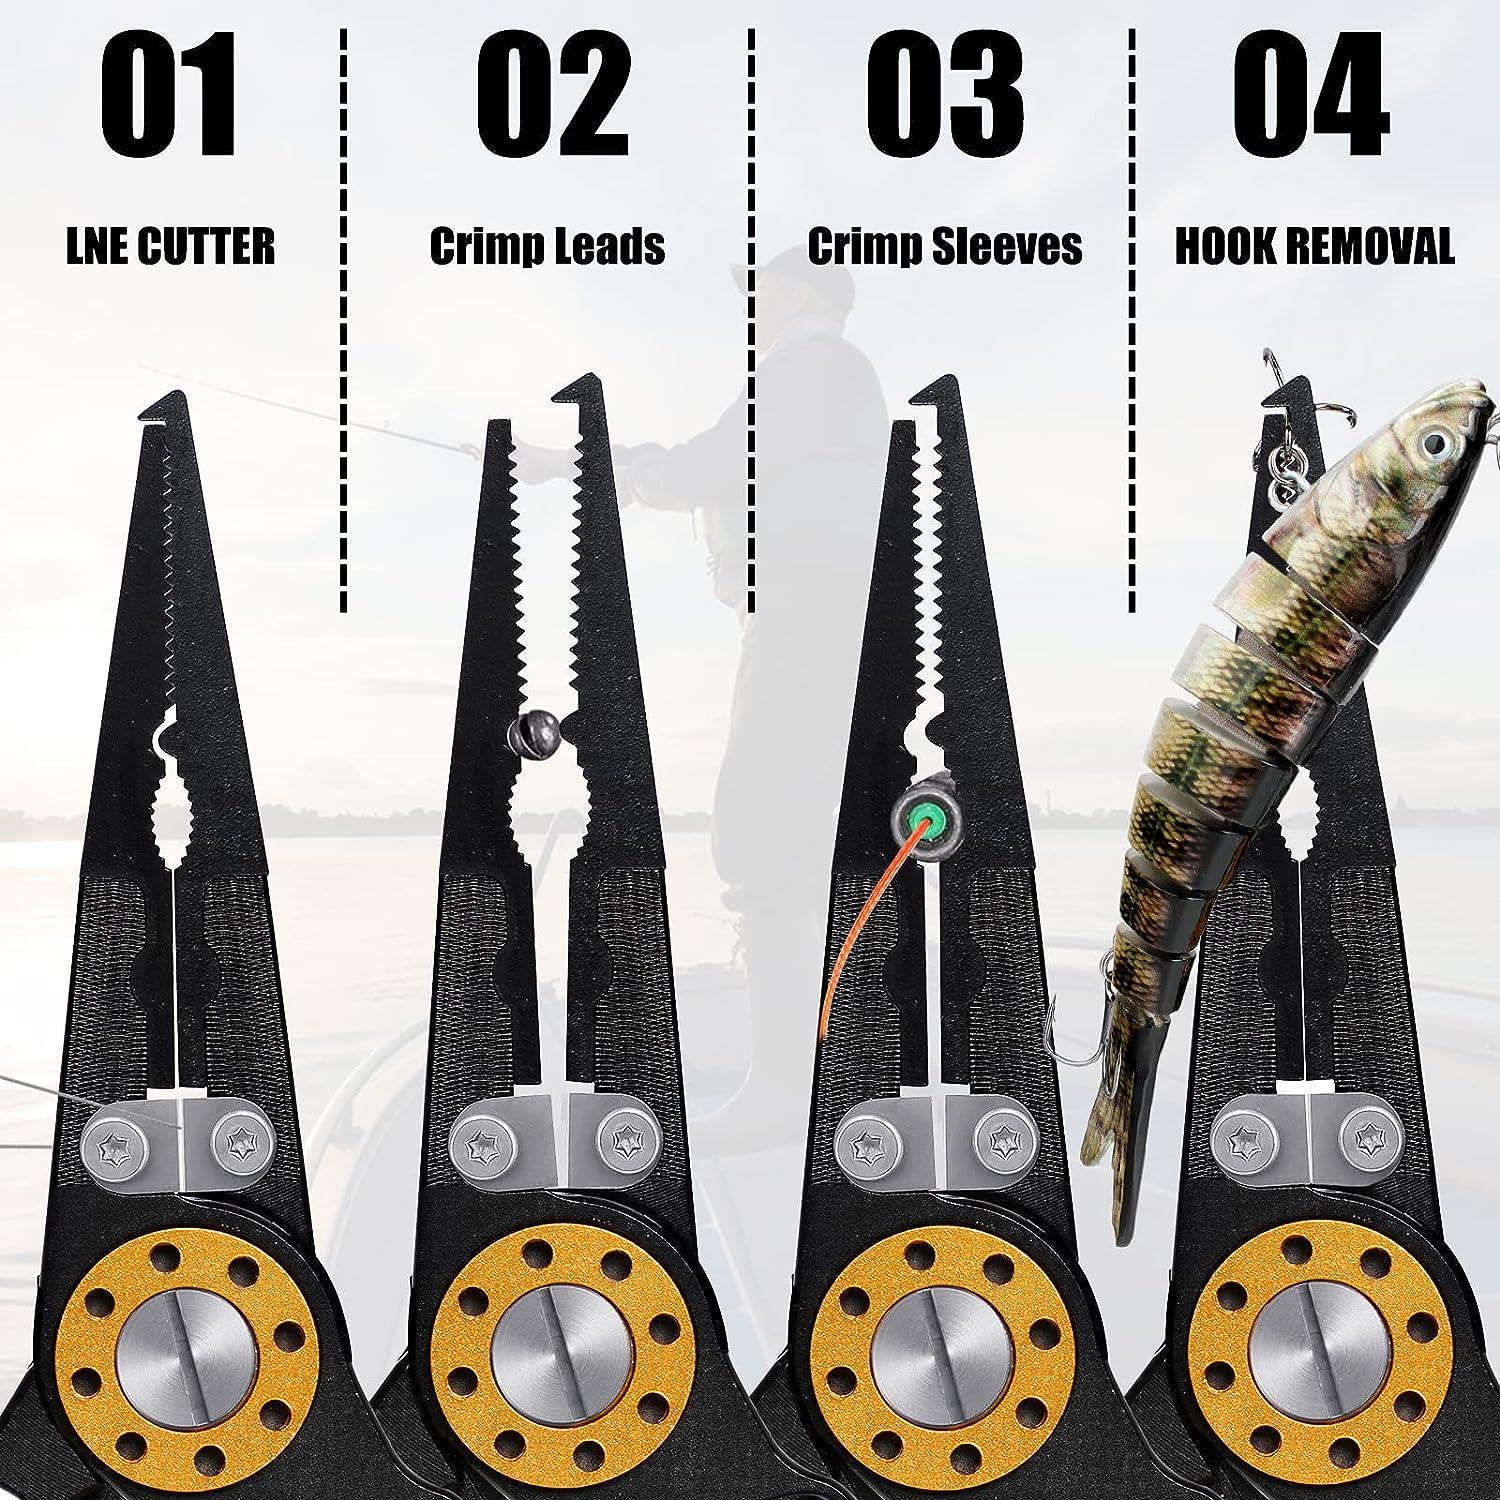 Vufprye Fishing Pliers, Upgraded Fish Lip Grippers,Aluminum